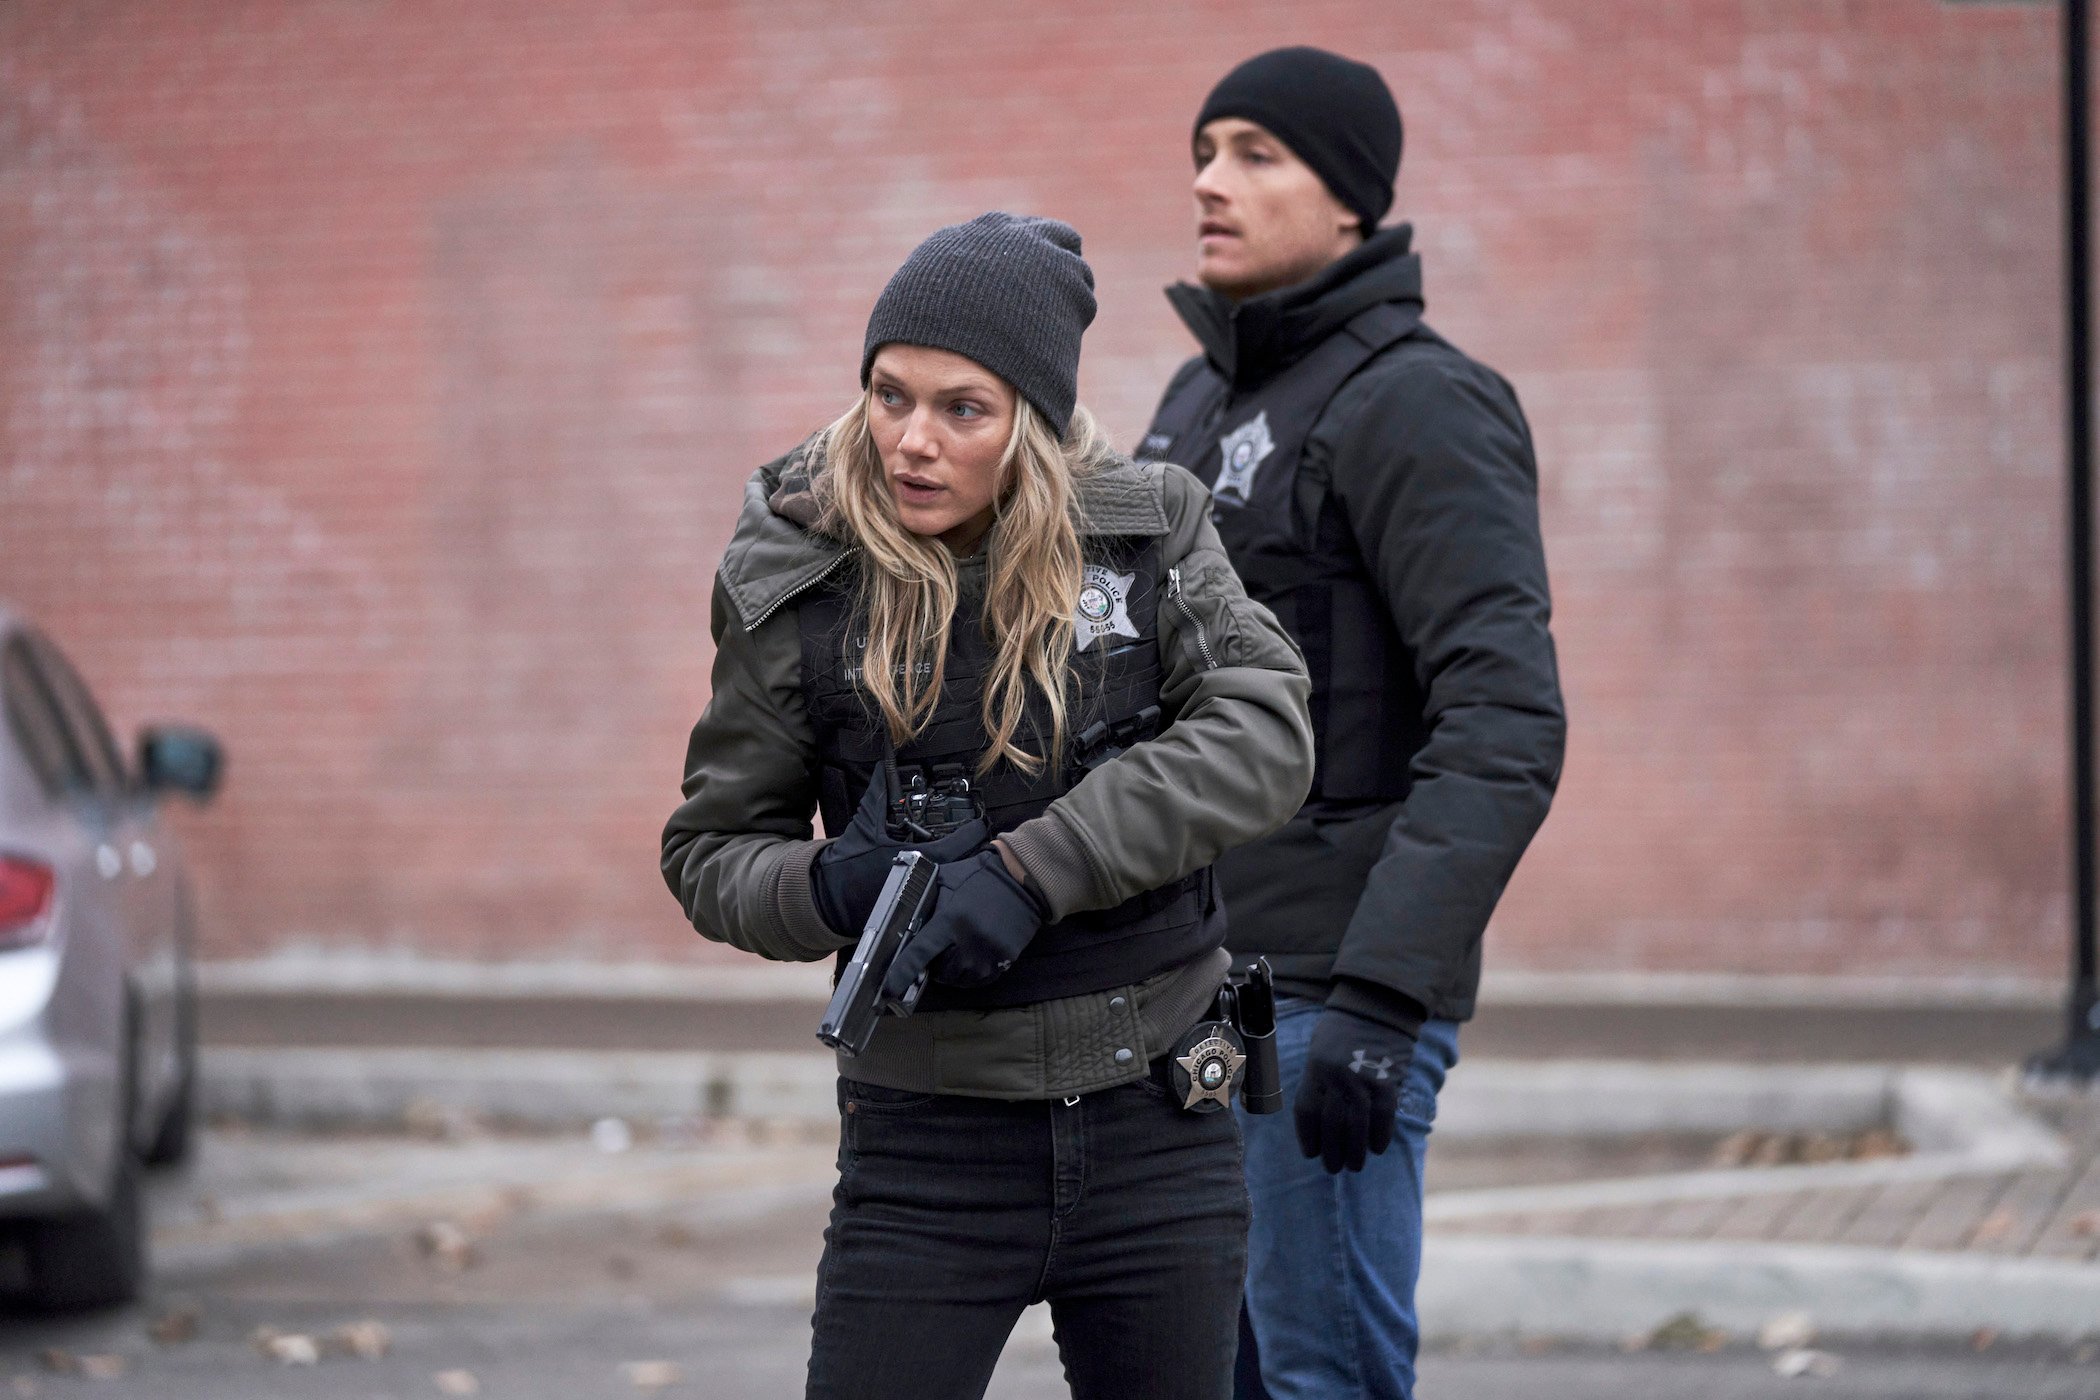 Jay Halstead behind Hailey Upton while she's holding a gun in 'Chicago P.D.' Jay Halstead and Hailey Upton get engaged in 'Chicago P.D.' Season 9